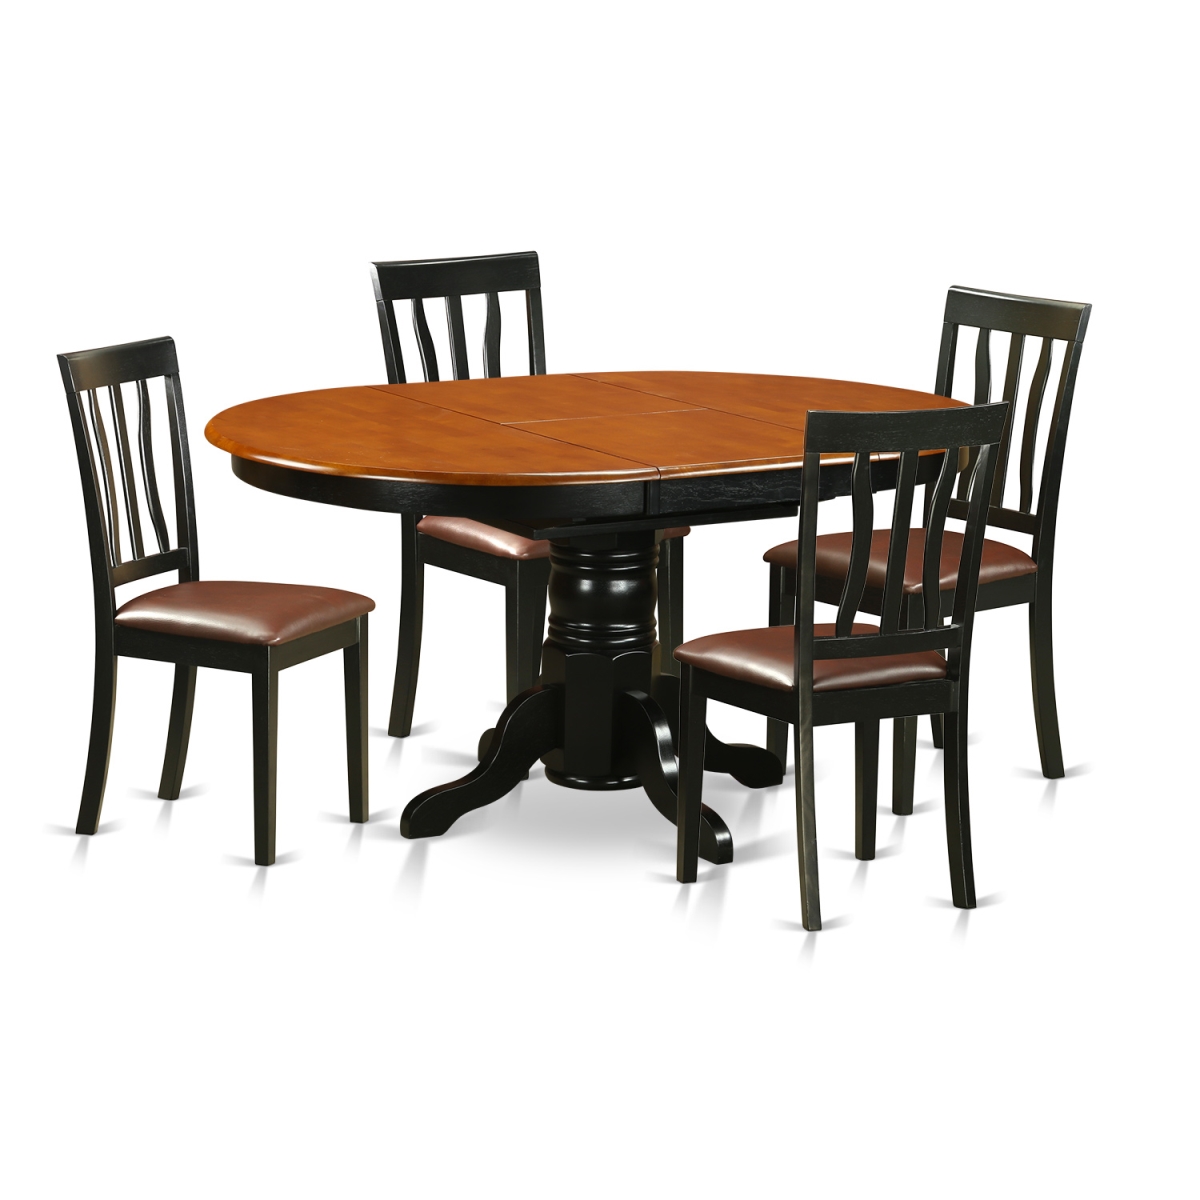 Picture of East West Furniture AVAT5-BLK-LC Faux Leather Dining Set with 4 Wooden Chairs, Black & Cherry - 5 Piece